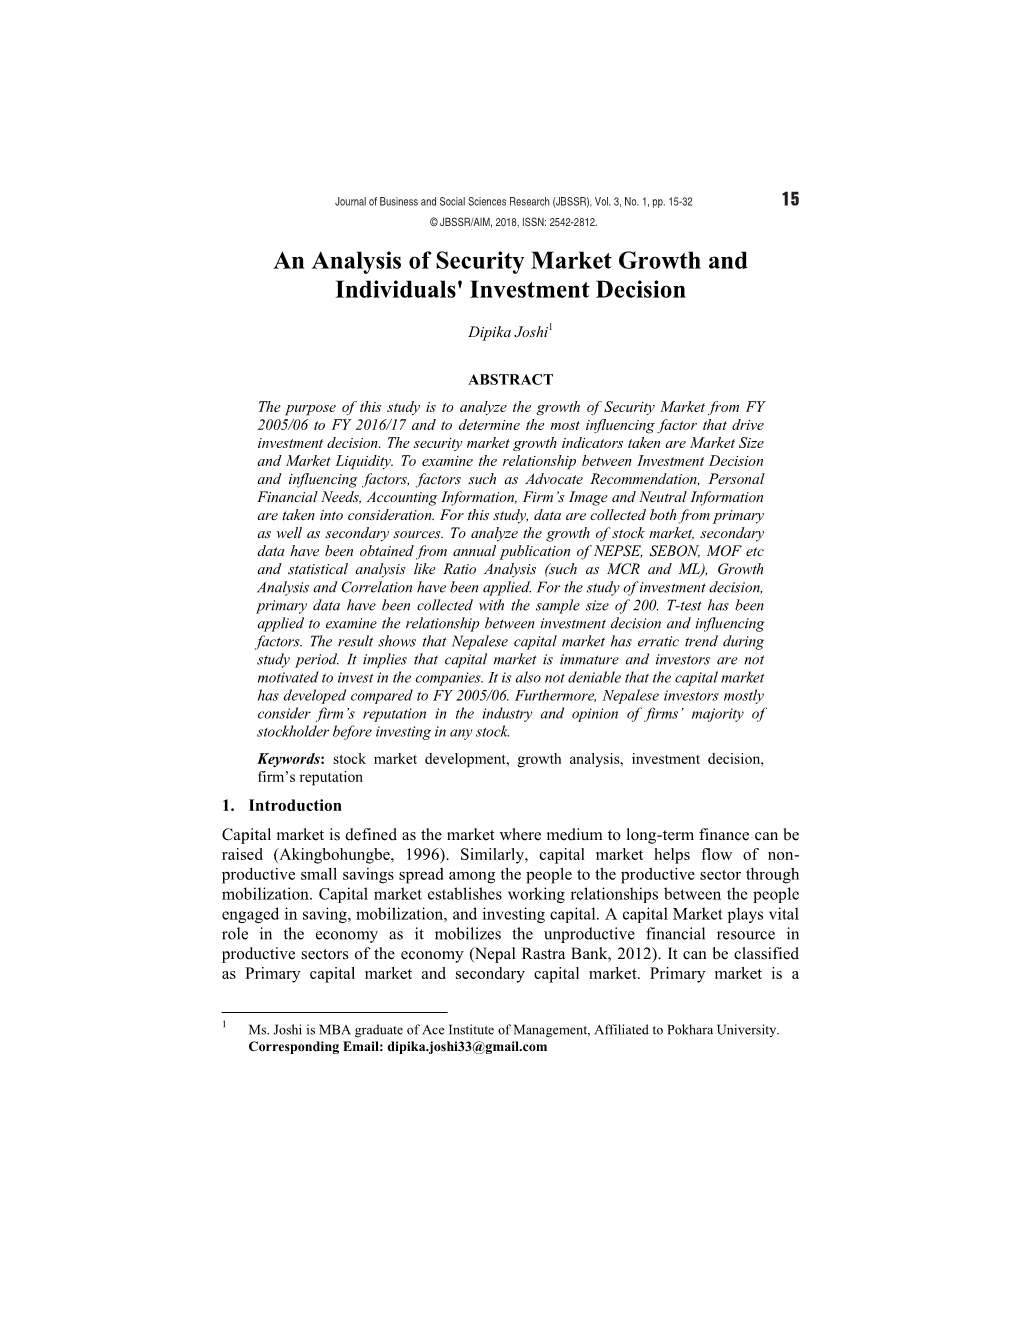 An Analysis of Security Market Growth and Individuals' Investment Decision